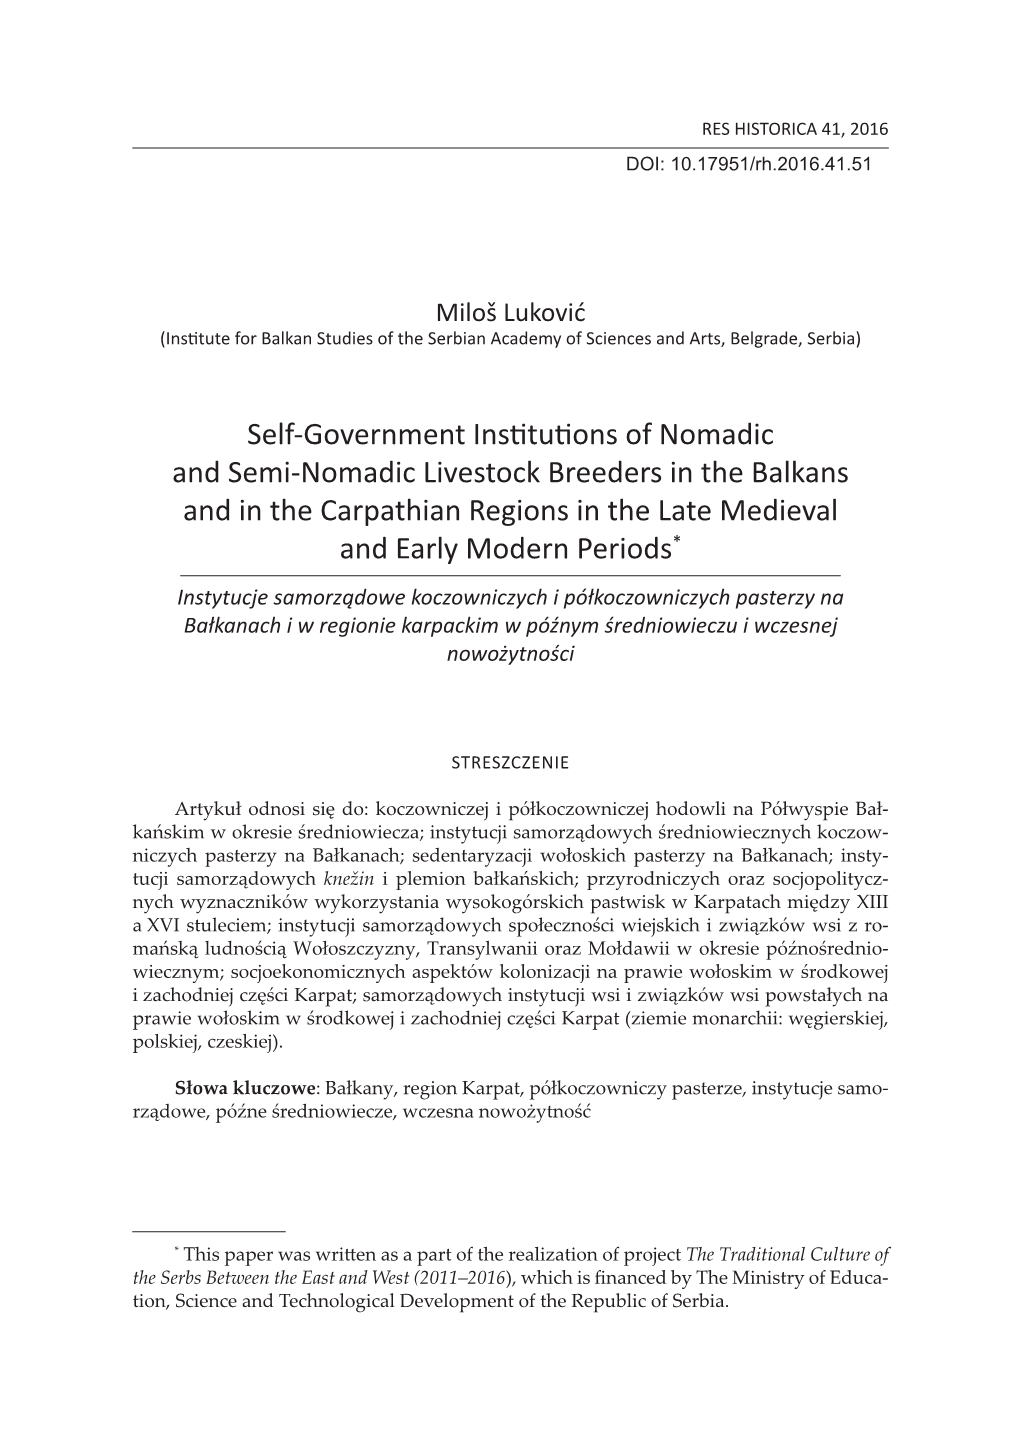 Self-Government Institutions of Nomadic and Semi-Nomadic Livestock Breeders in the Balkans and in the Carpathian Regions In